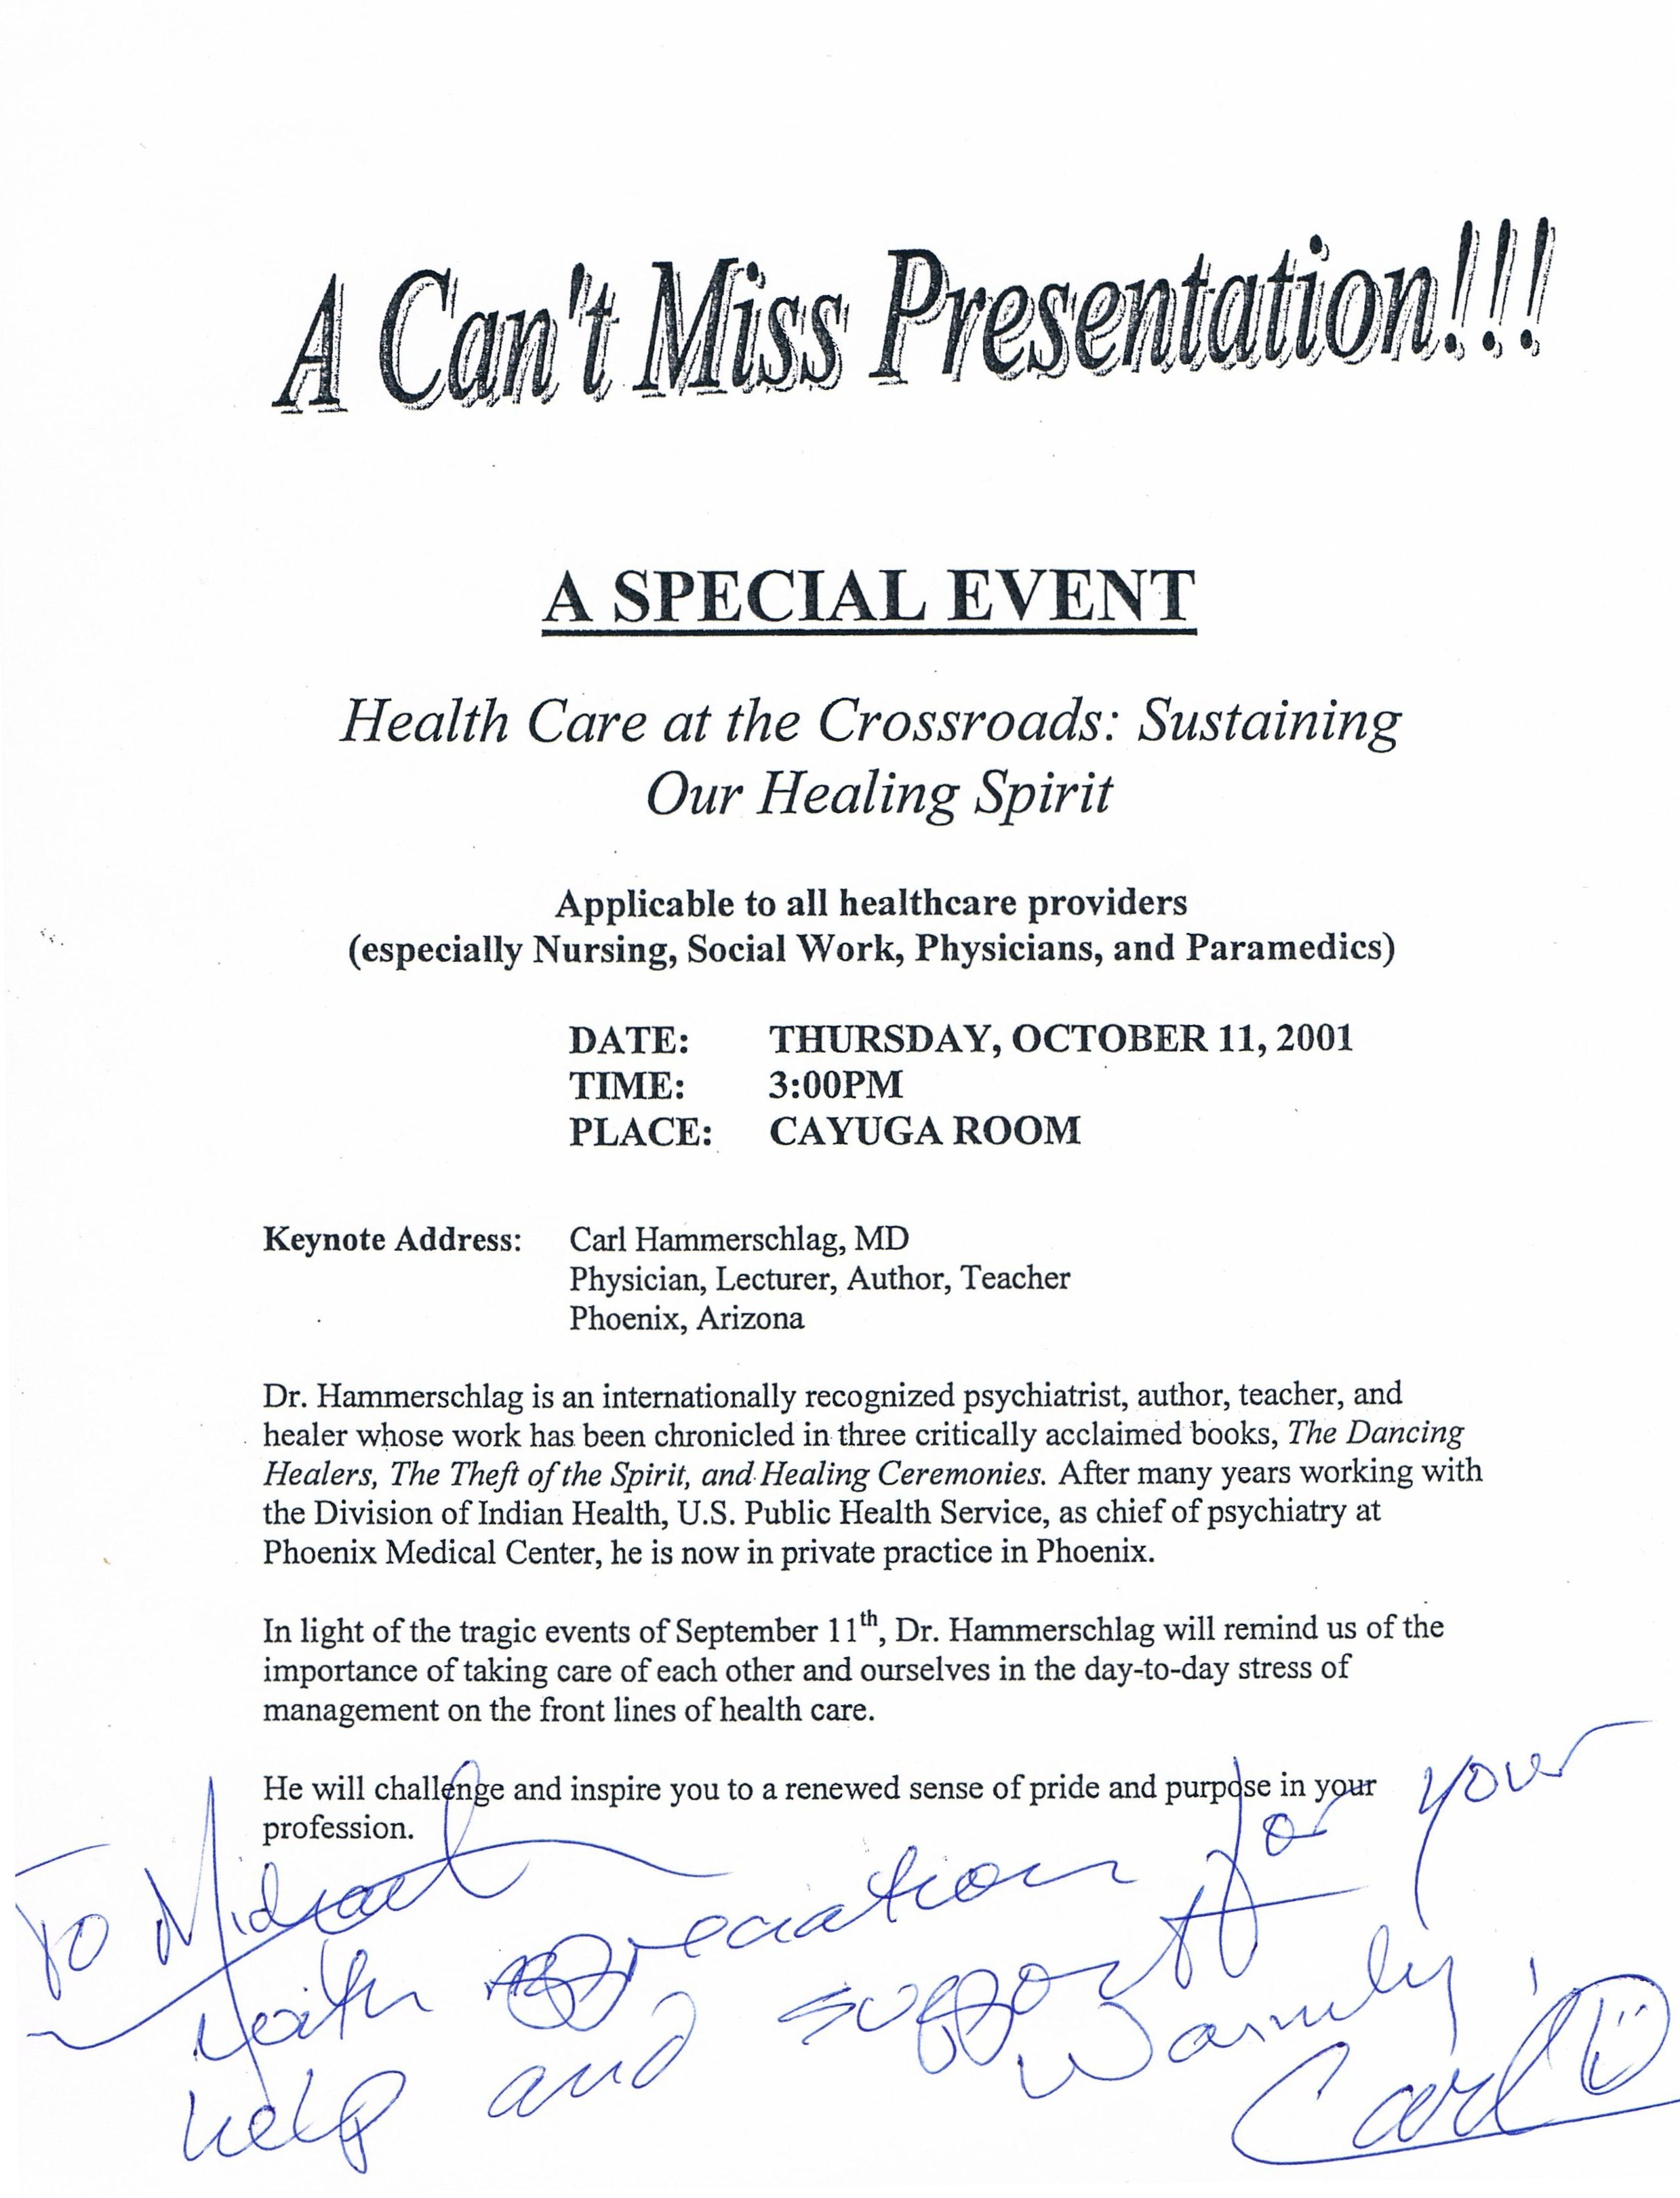 A flyer for a special event, featuring black type on white paper with a blue signature at the bottom